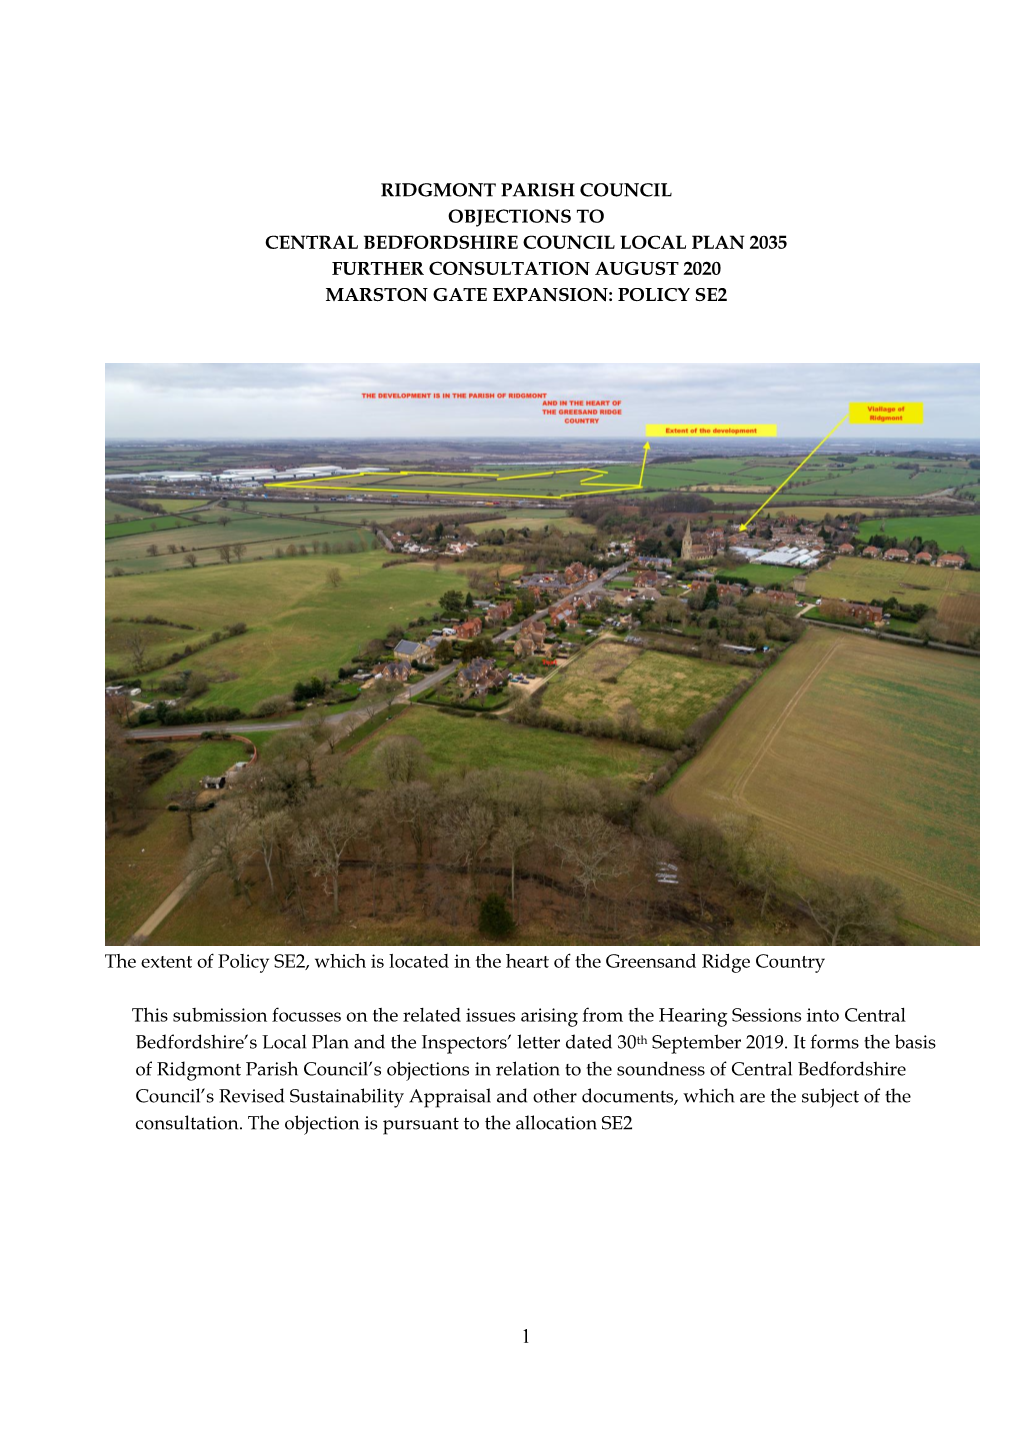 Ridgmont Parish Council Objections to Central Bedfordshire Council Local Plan 2035 Further Consultation August 2020 Marston Gate Expansion: Policy Se2